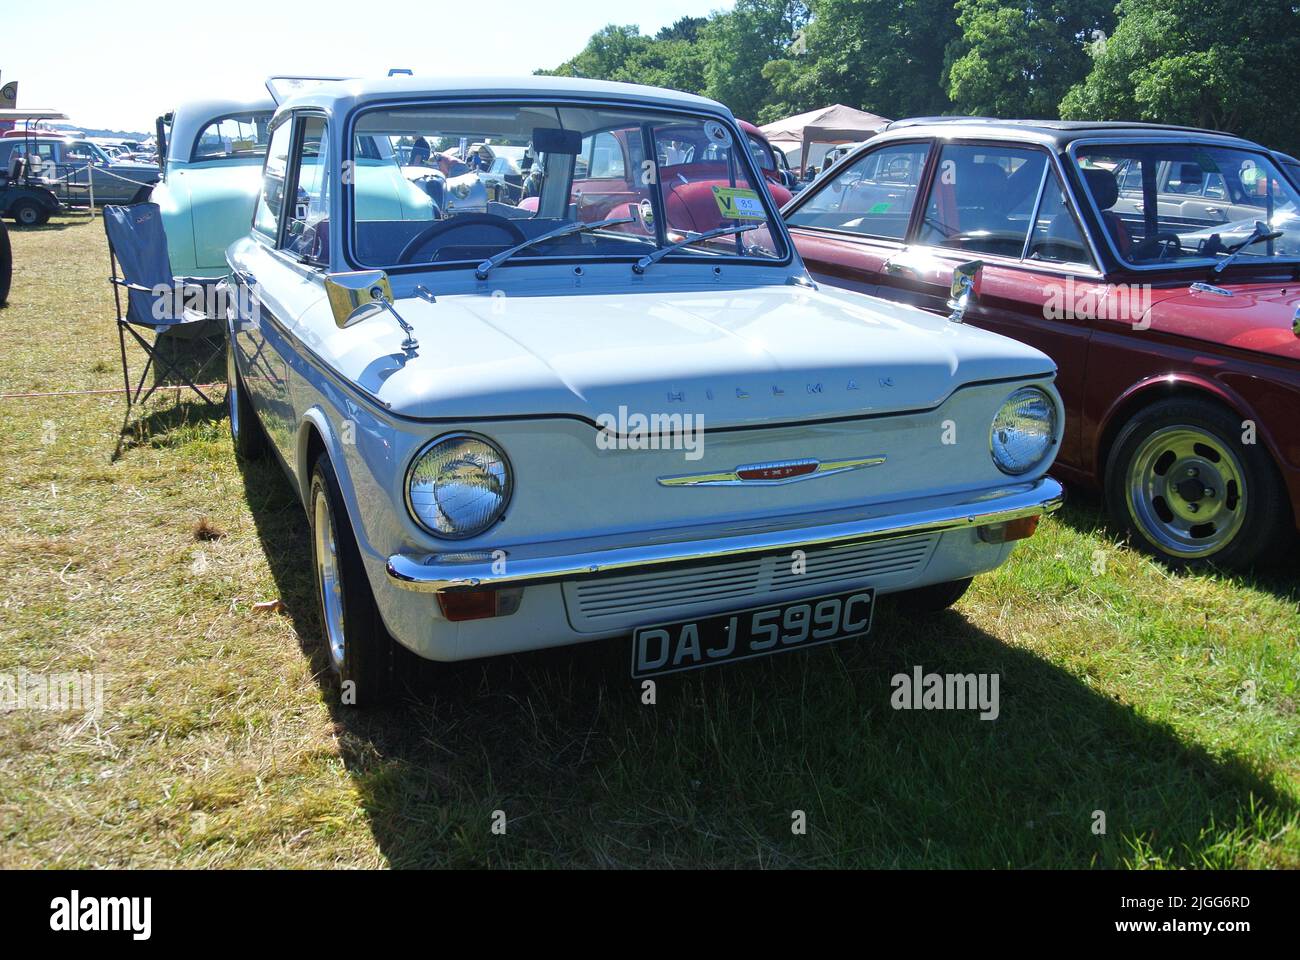 A 1965 Hillman Imp car parked on display at the 47th Historic Vehicle Gathering classic car show, Powderham, Devon, England, UK. Stock Photo